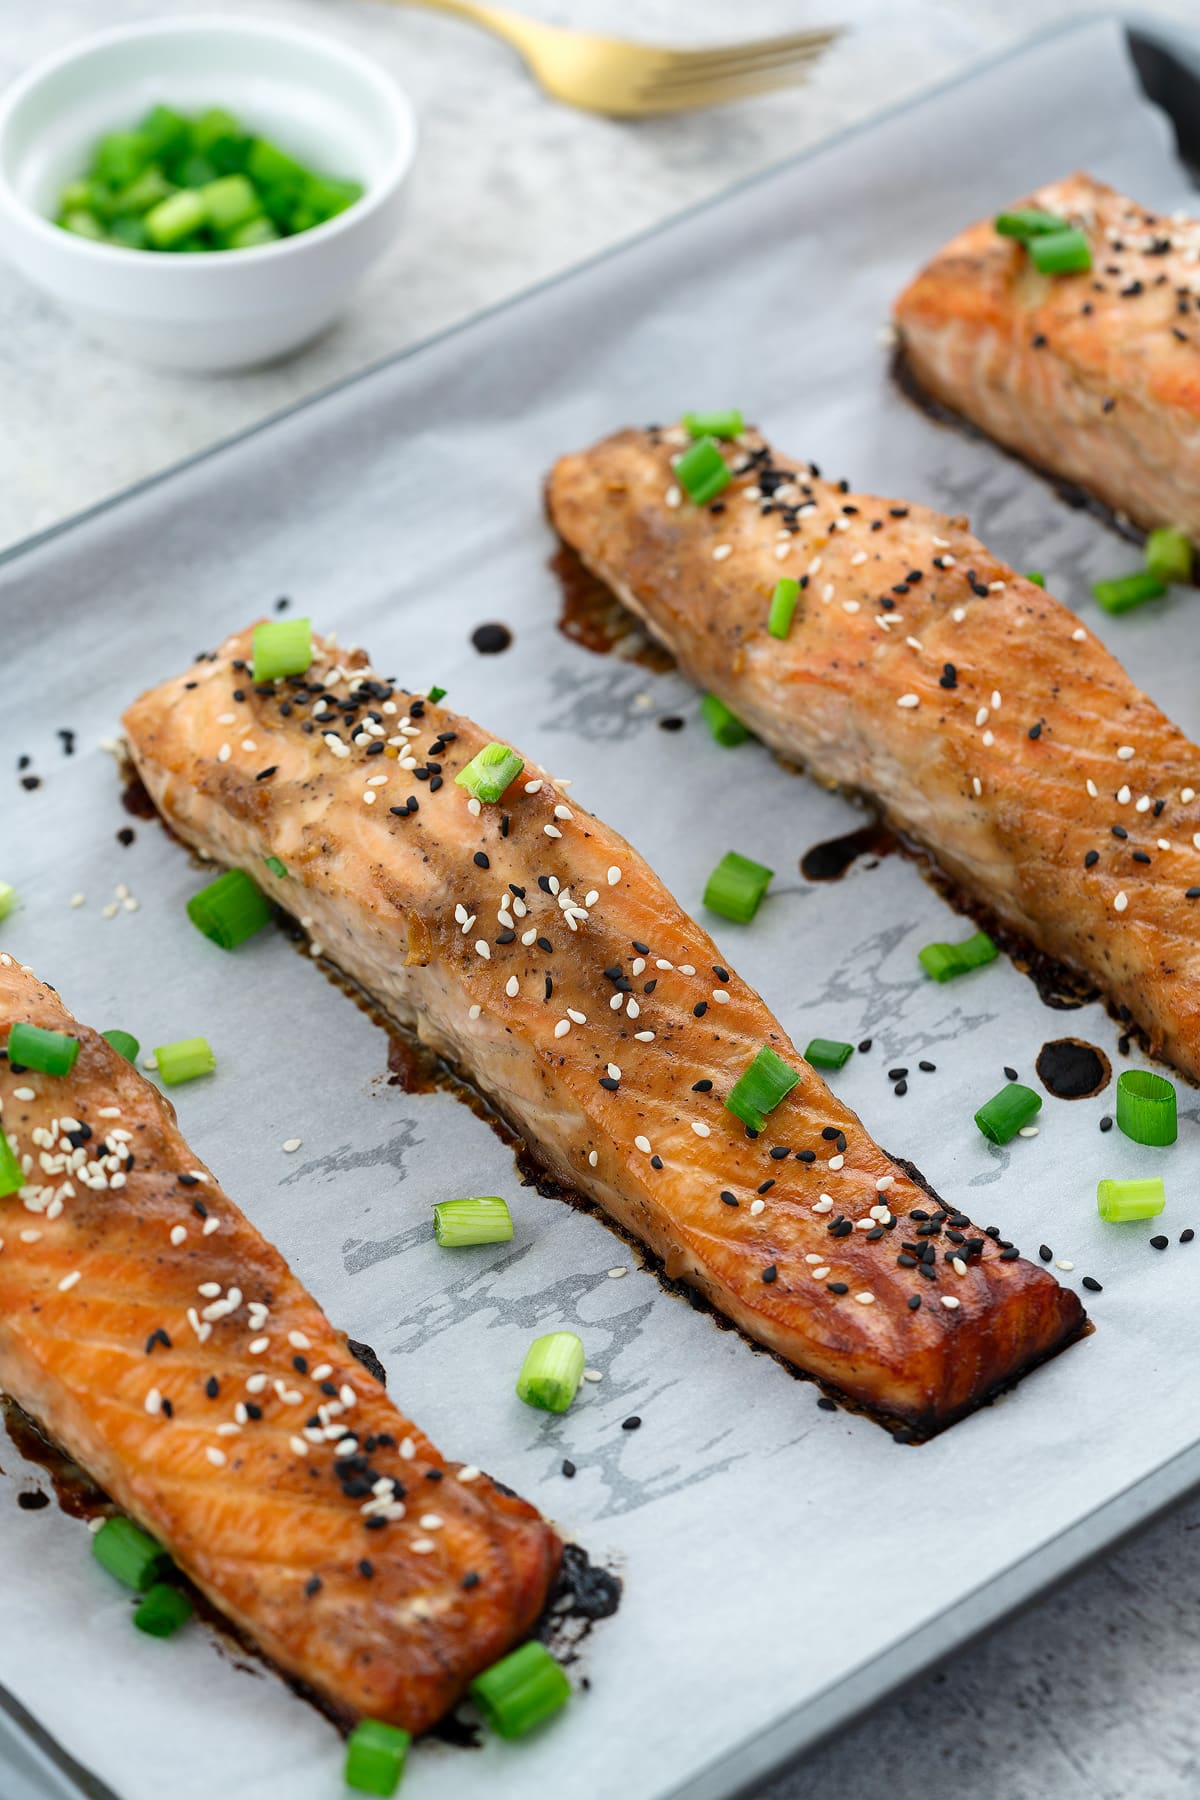 Miso-glazed salmon on a baking sheet garnished with black and white sesame seeds and spring onions. Surrounding the salmon are a golden fork and a cup of chopped spring onions.